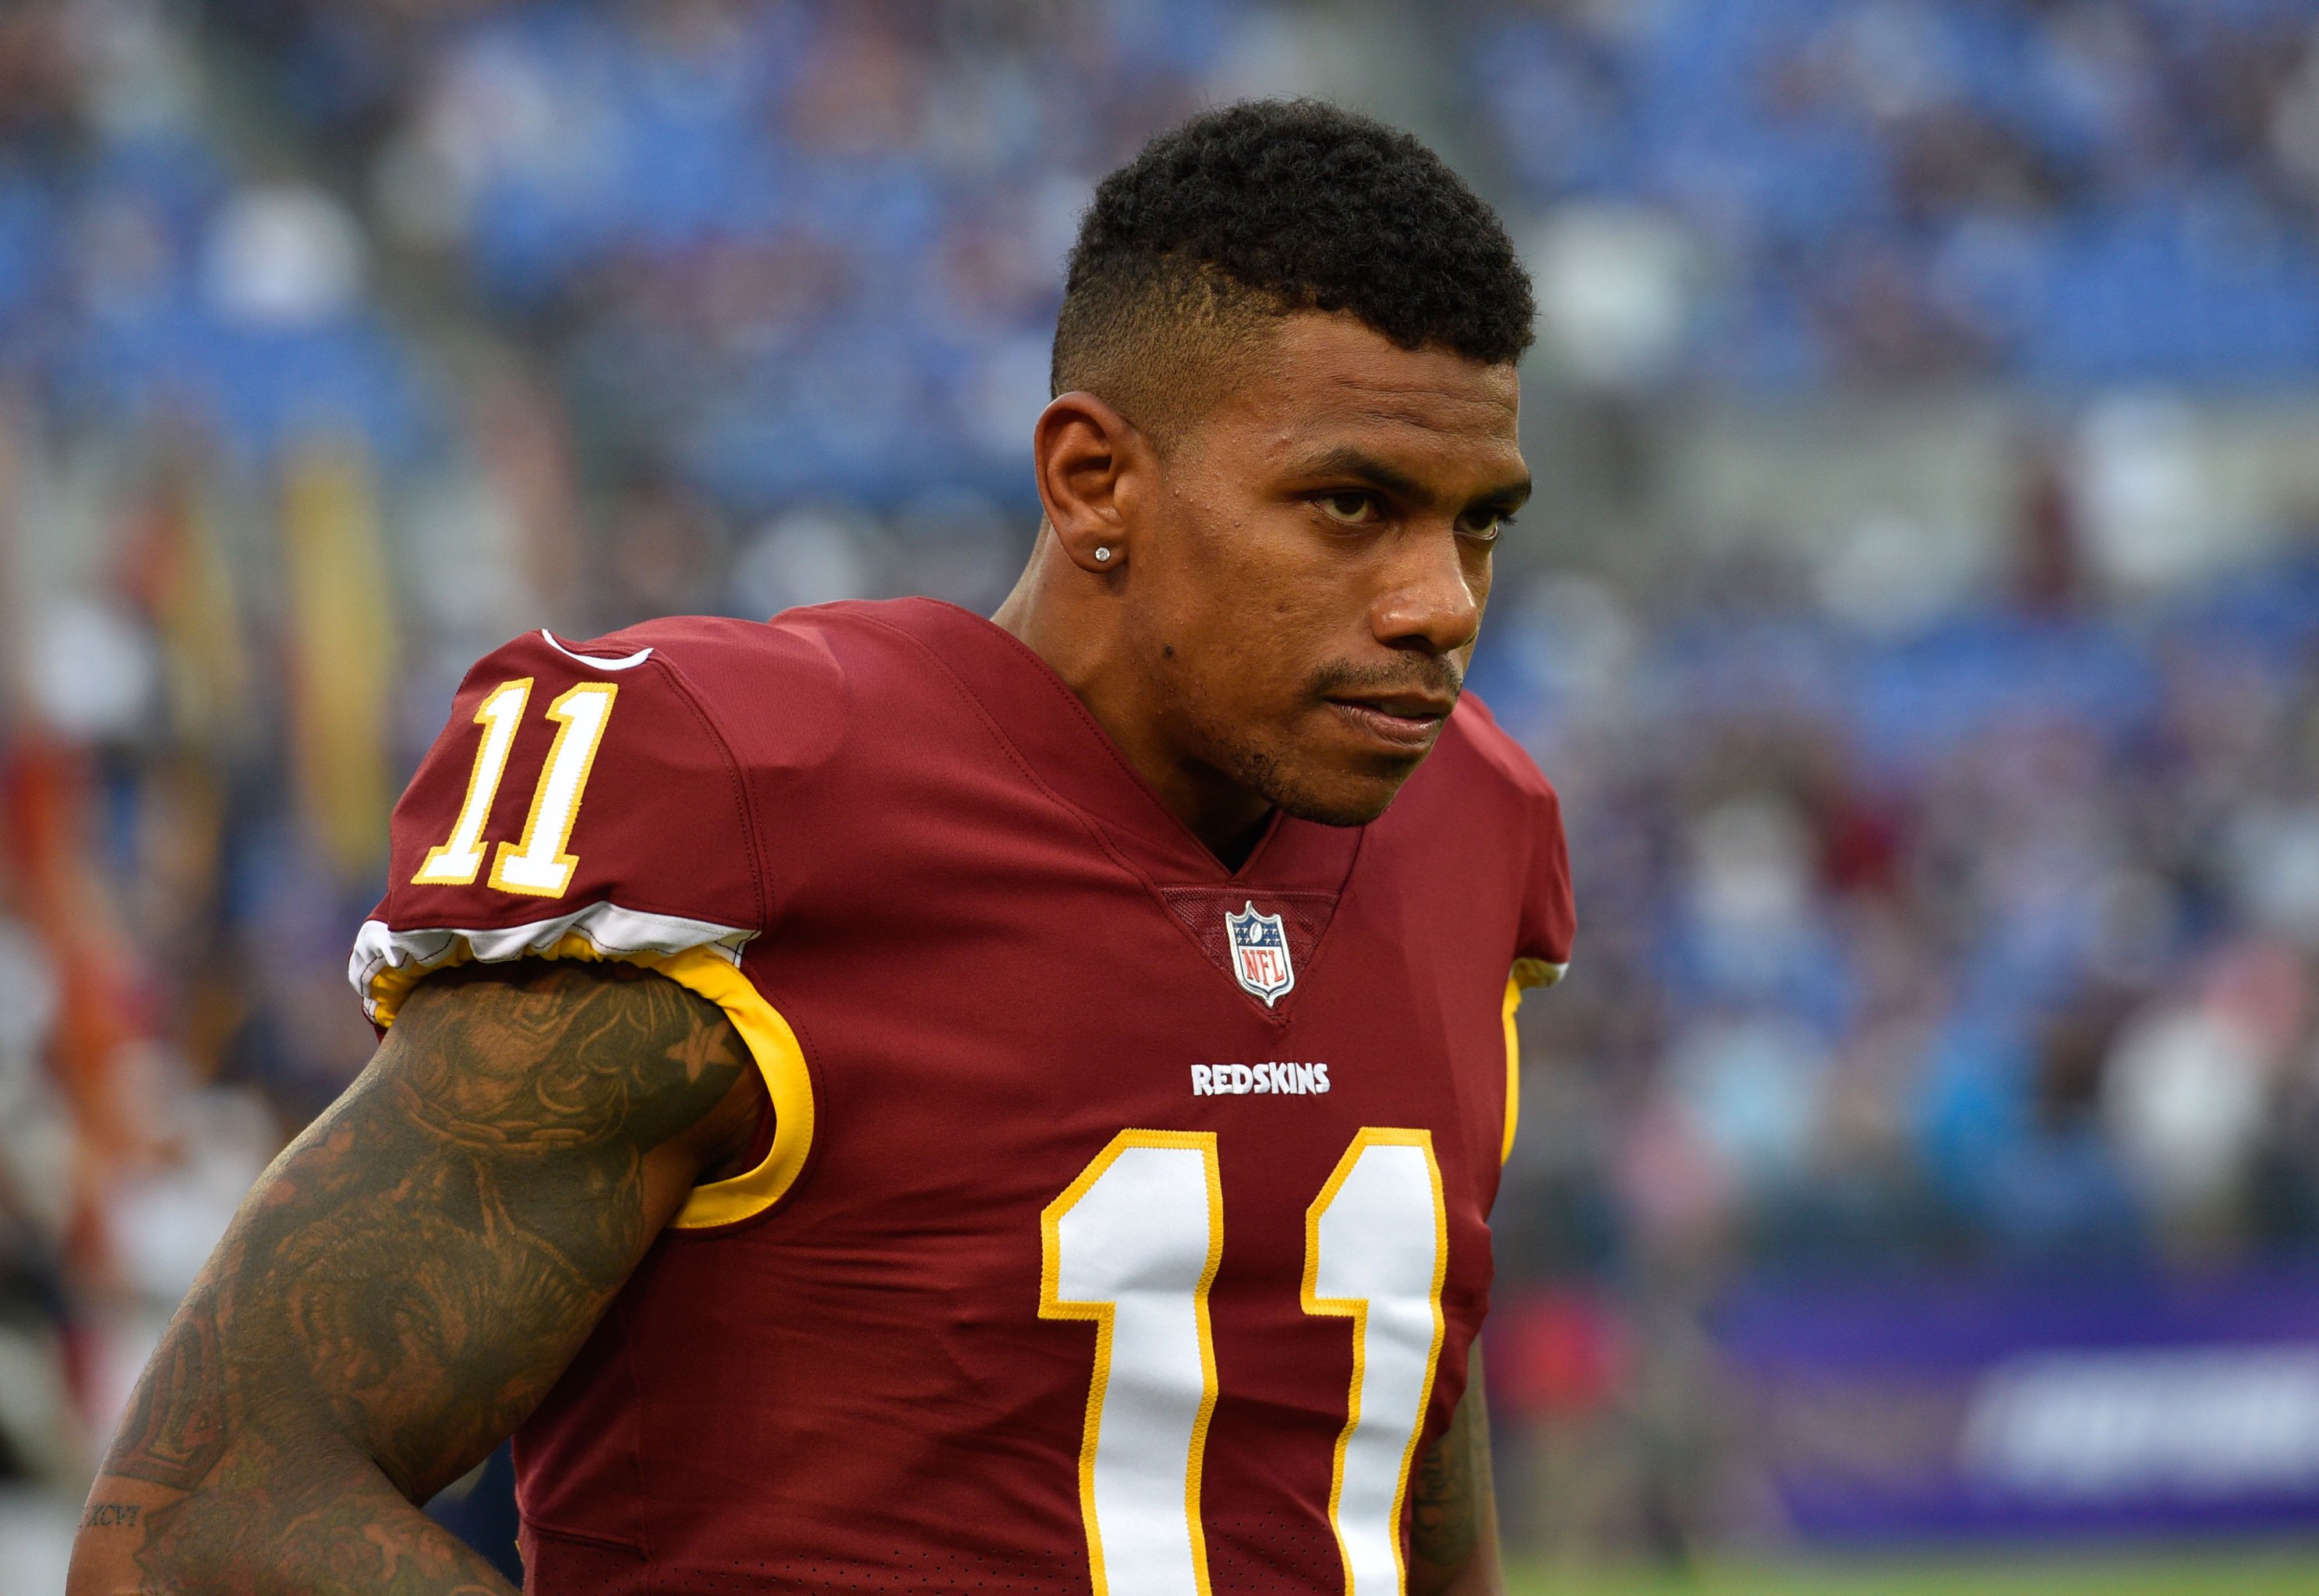 Jets WR Terrelle Pryor: 'Lot of Things I Wasn't Happy With'